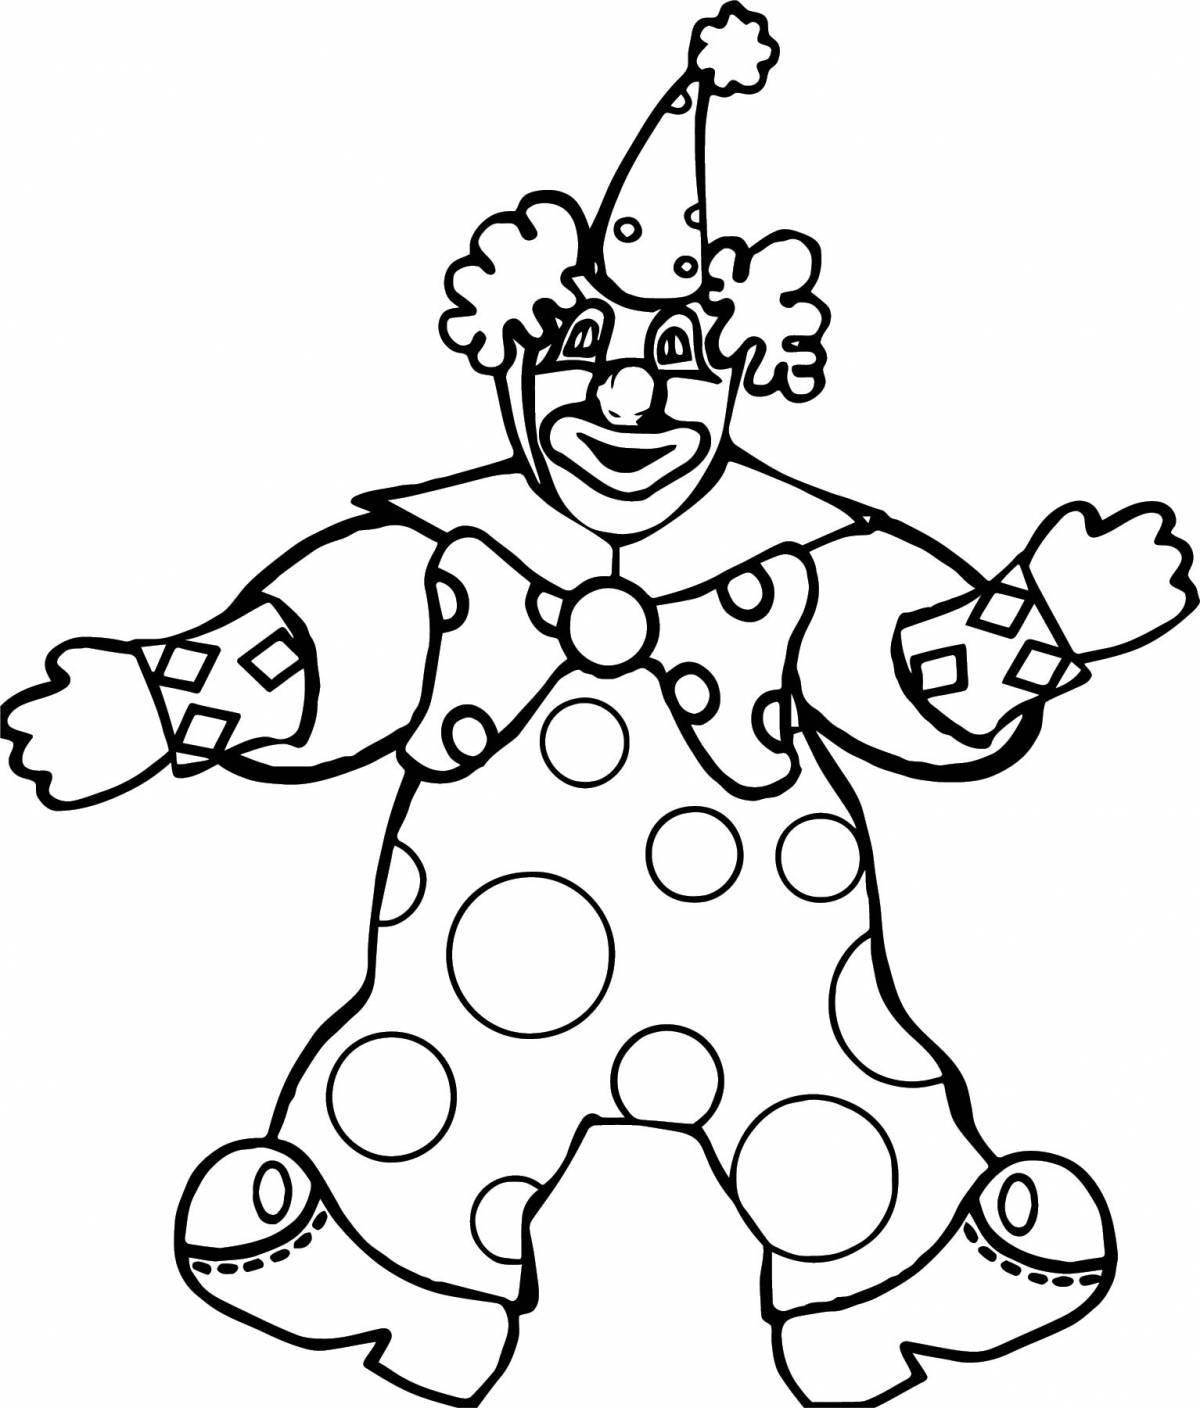 Adorable parsley character coloring page